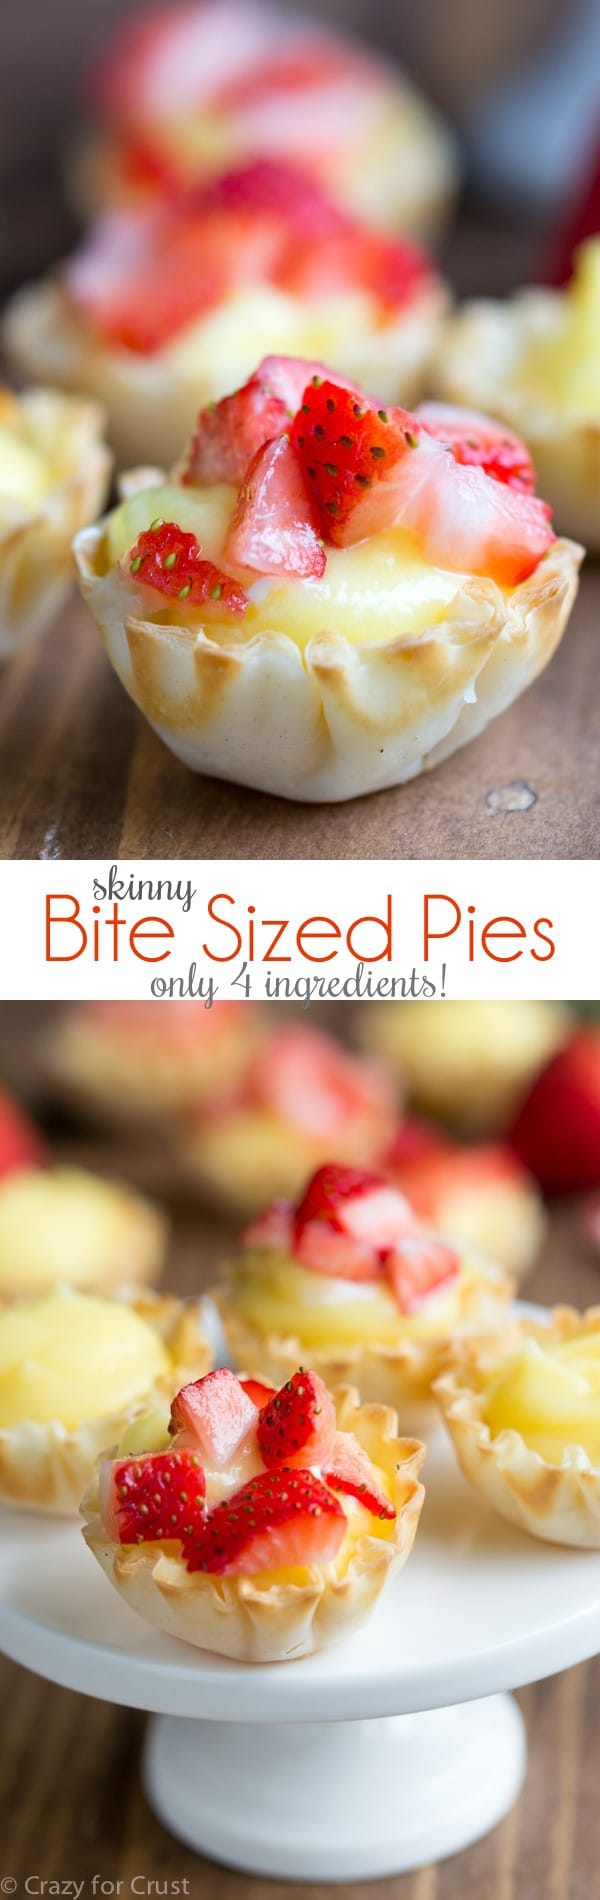 Skinny Bite Sized Pies with only 4 ingredients!